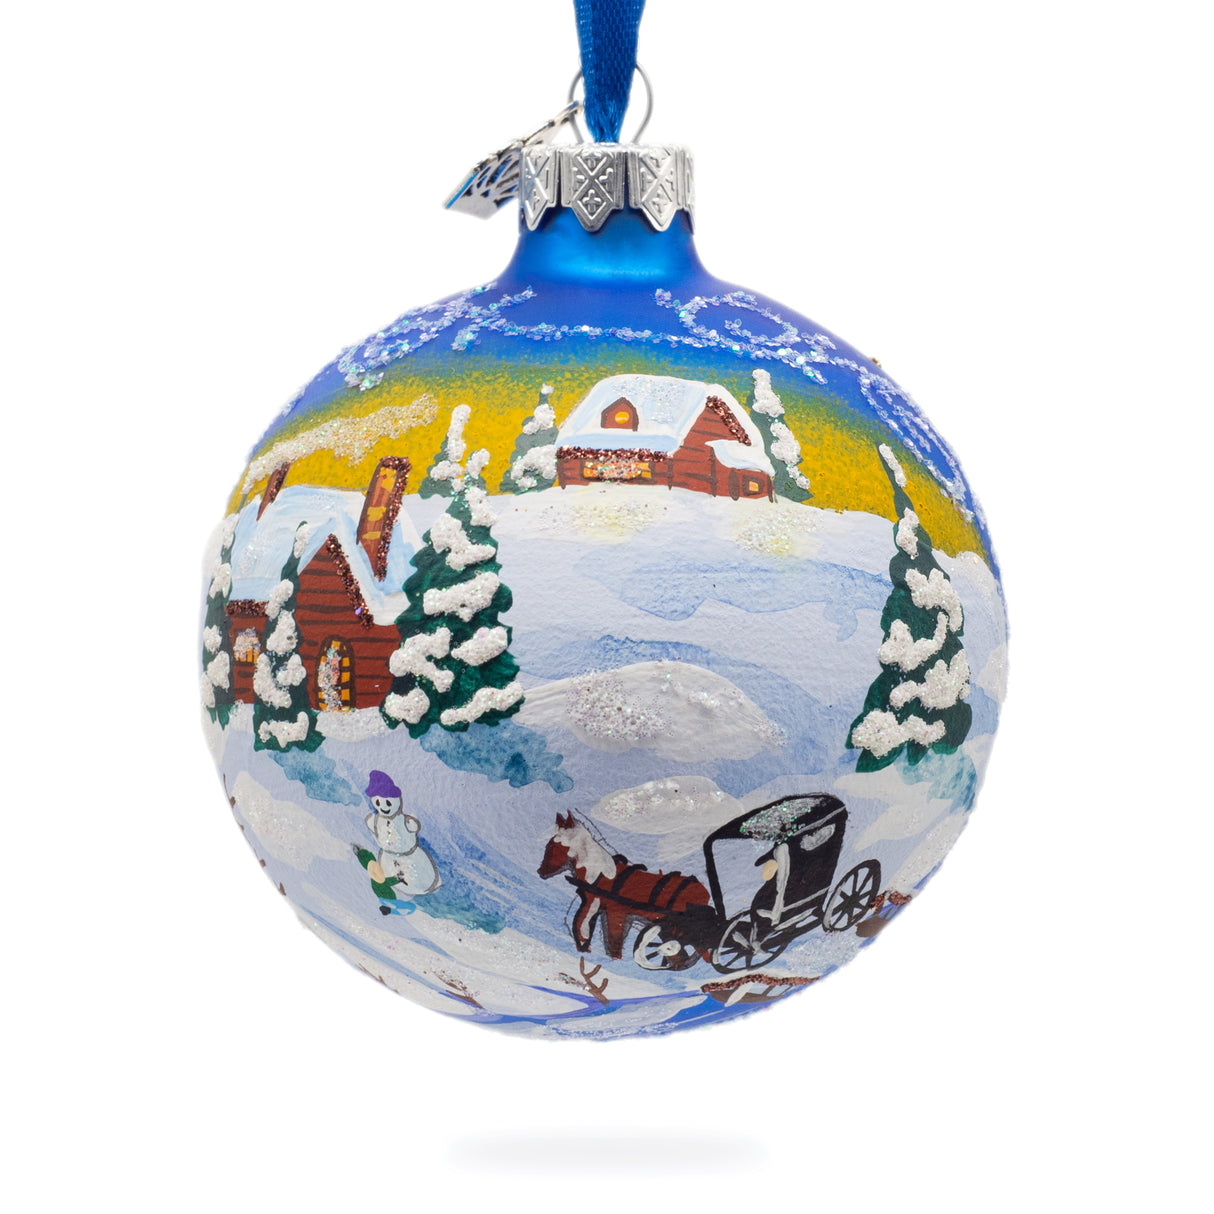 Glass The Couch in the Winter Village Glass Ball Christmas Ornament 3.25 Inches in Multi color Round